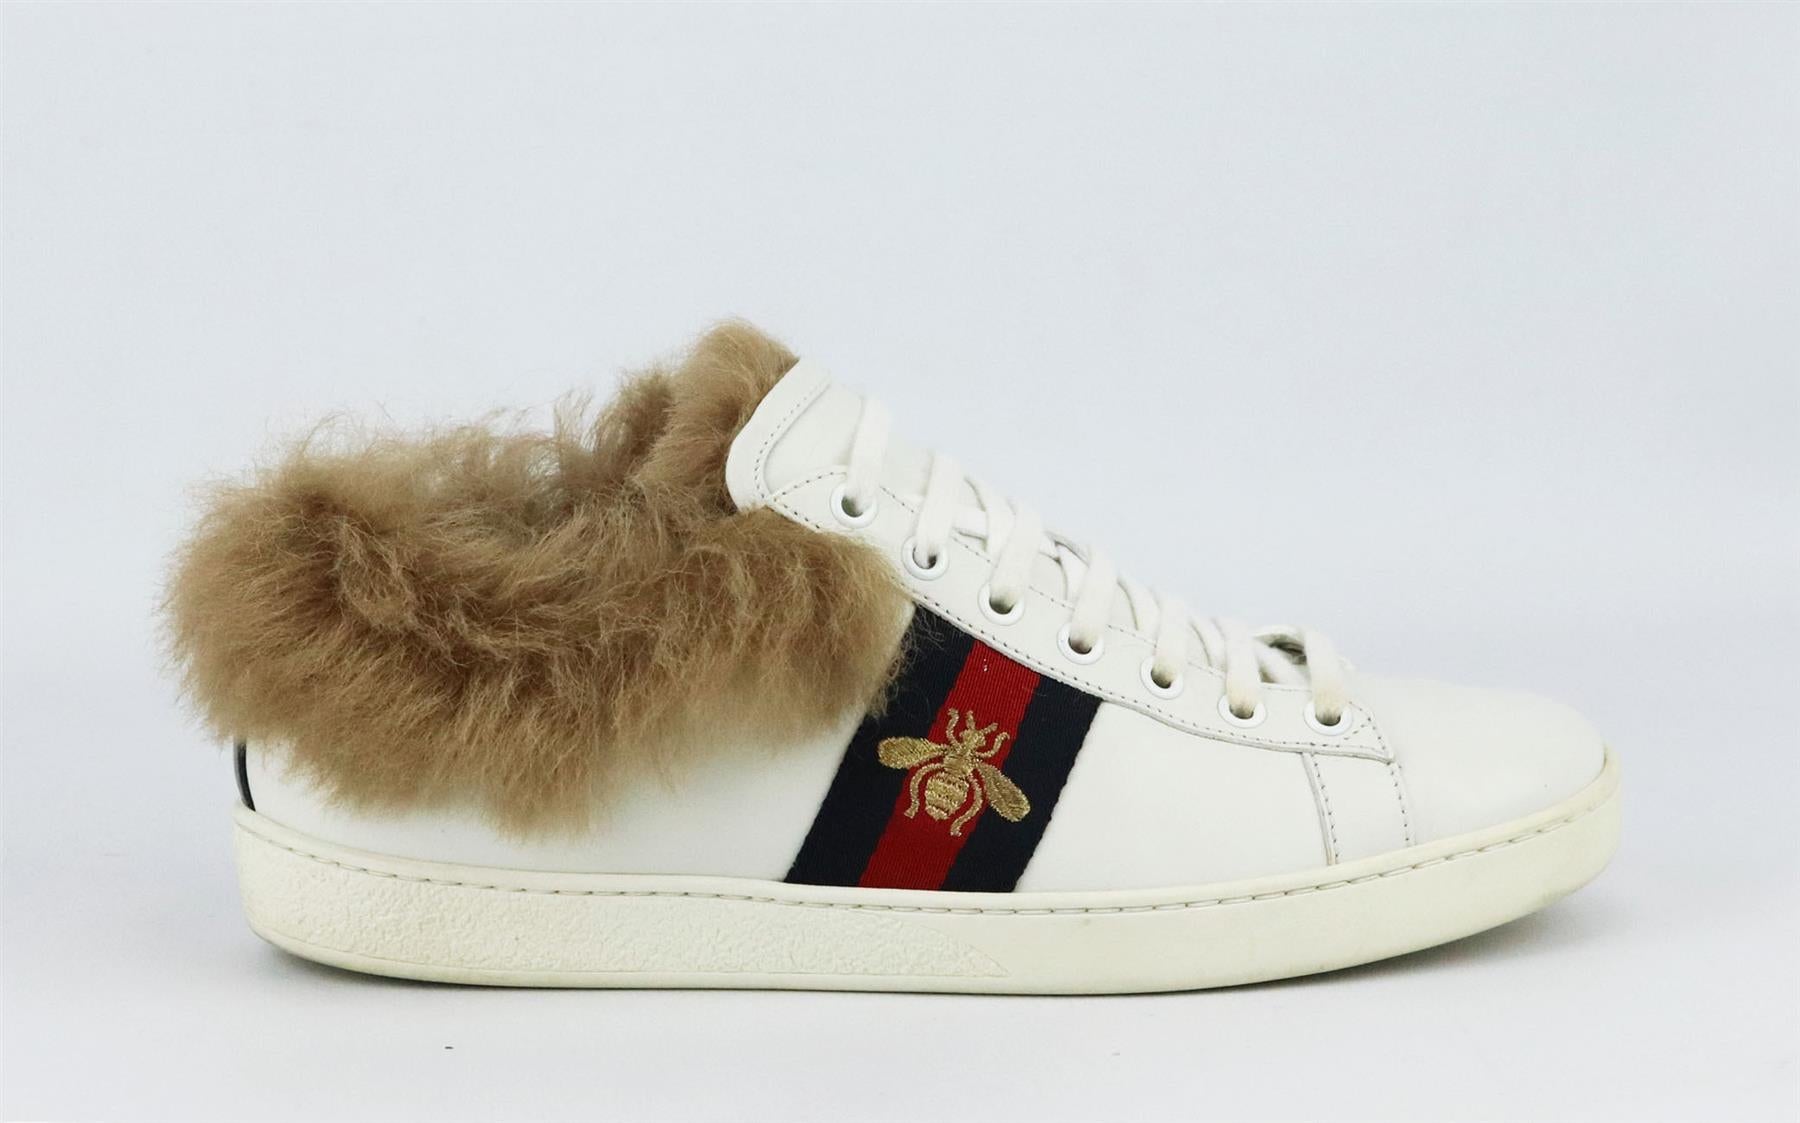 These 'Ace' sneakers by Gucci are a cool, sporty take on the now iconic style, made in Italy from pristine white leather, they have the instantly recognizable navy and red webbing that's embroidered with a gold bee while the shearling lining keep